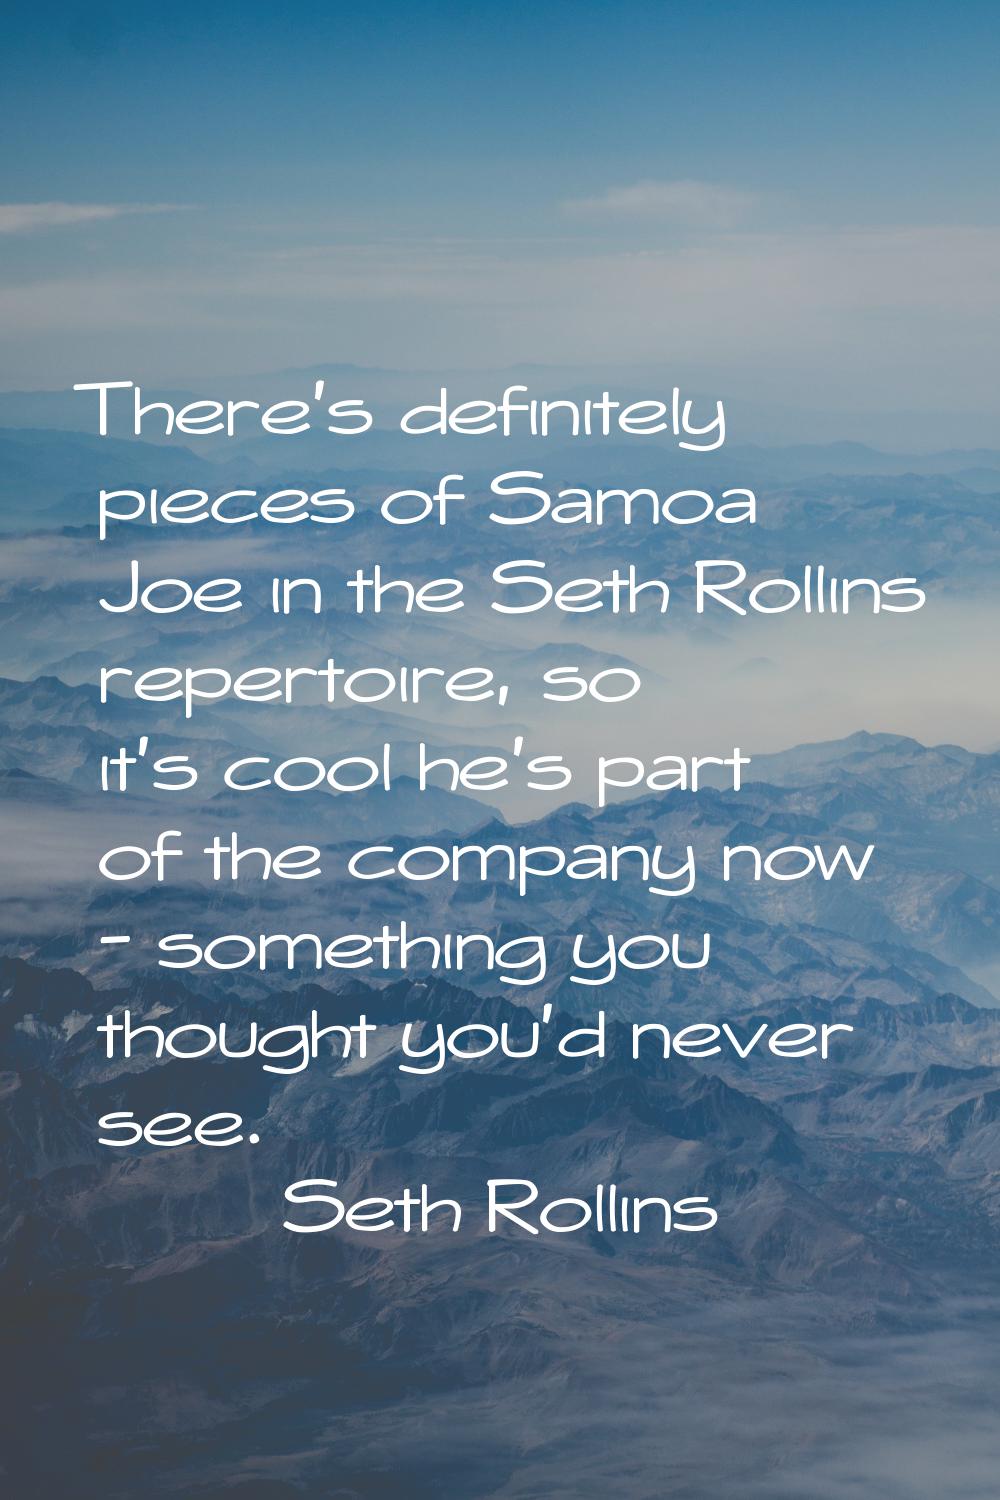 There's definitely pieces of Samoa Joe in the Seth Rollins repertoire, so it's cool he's part of th